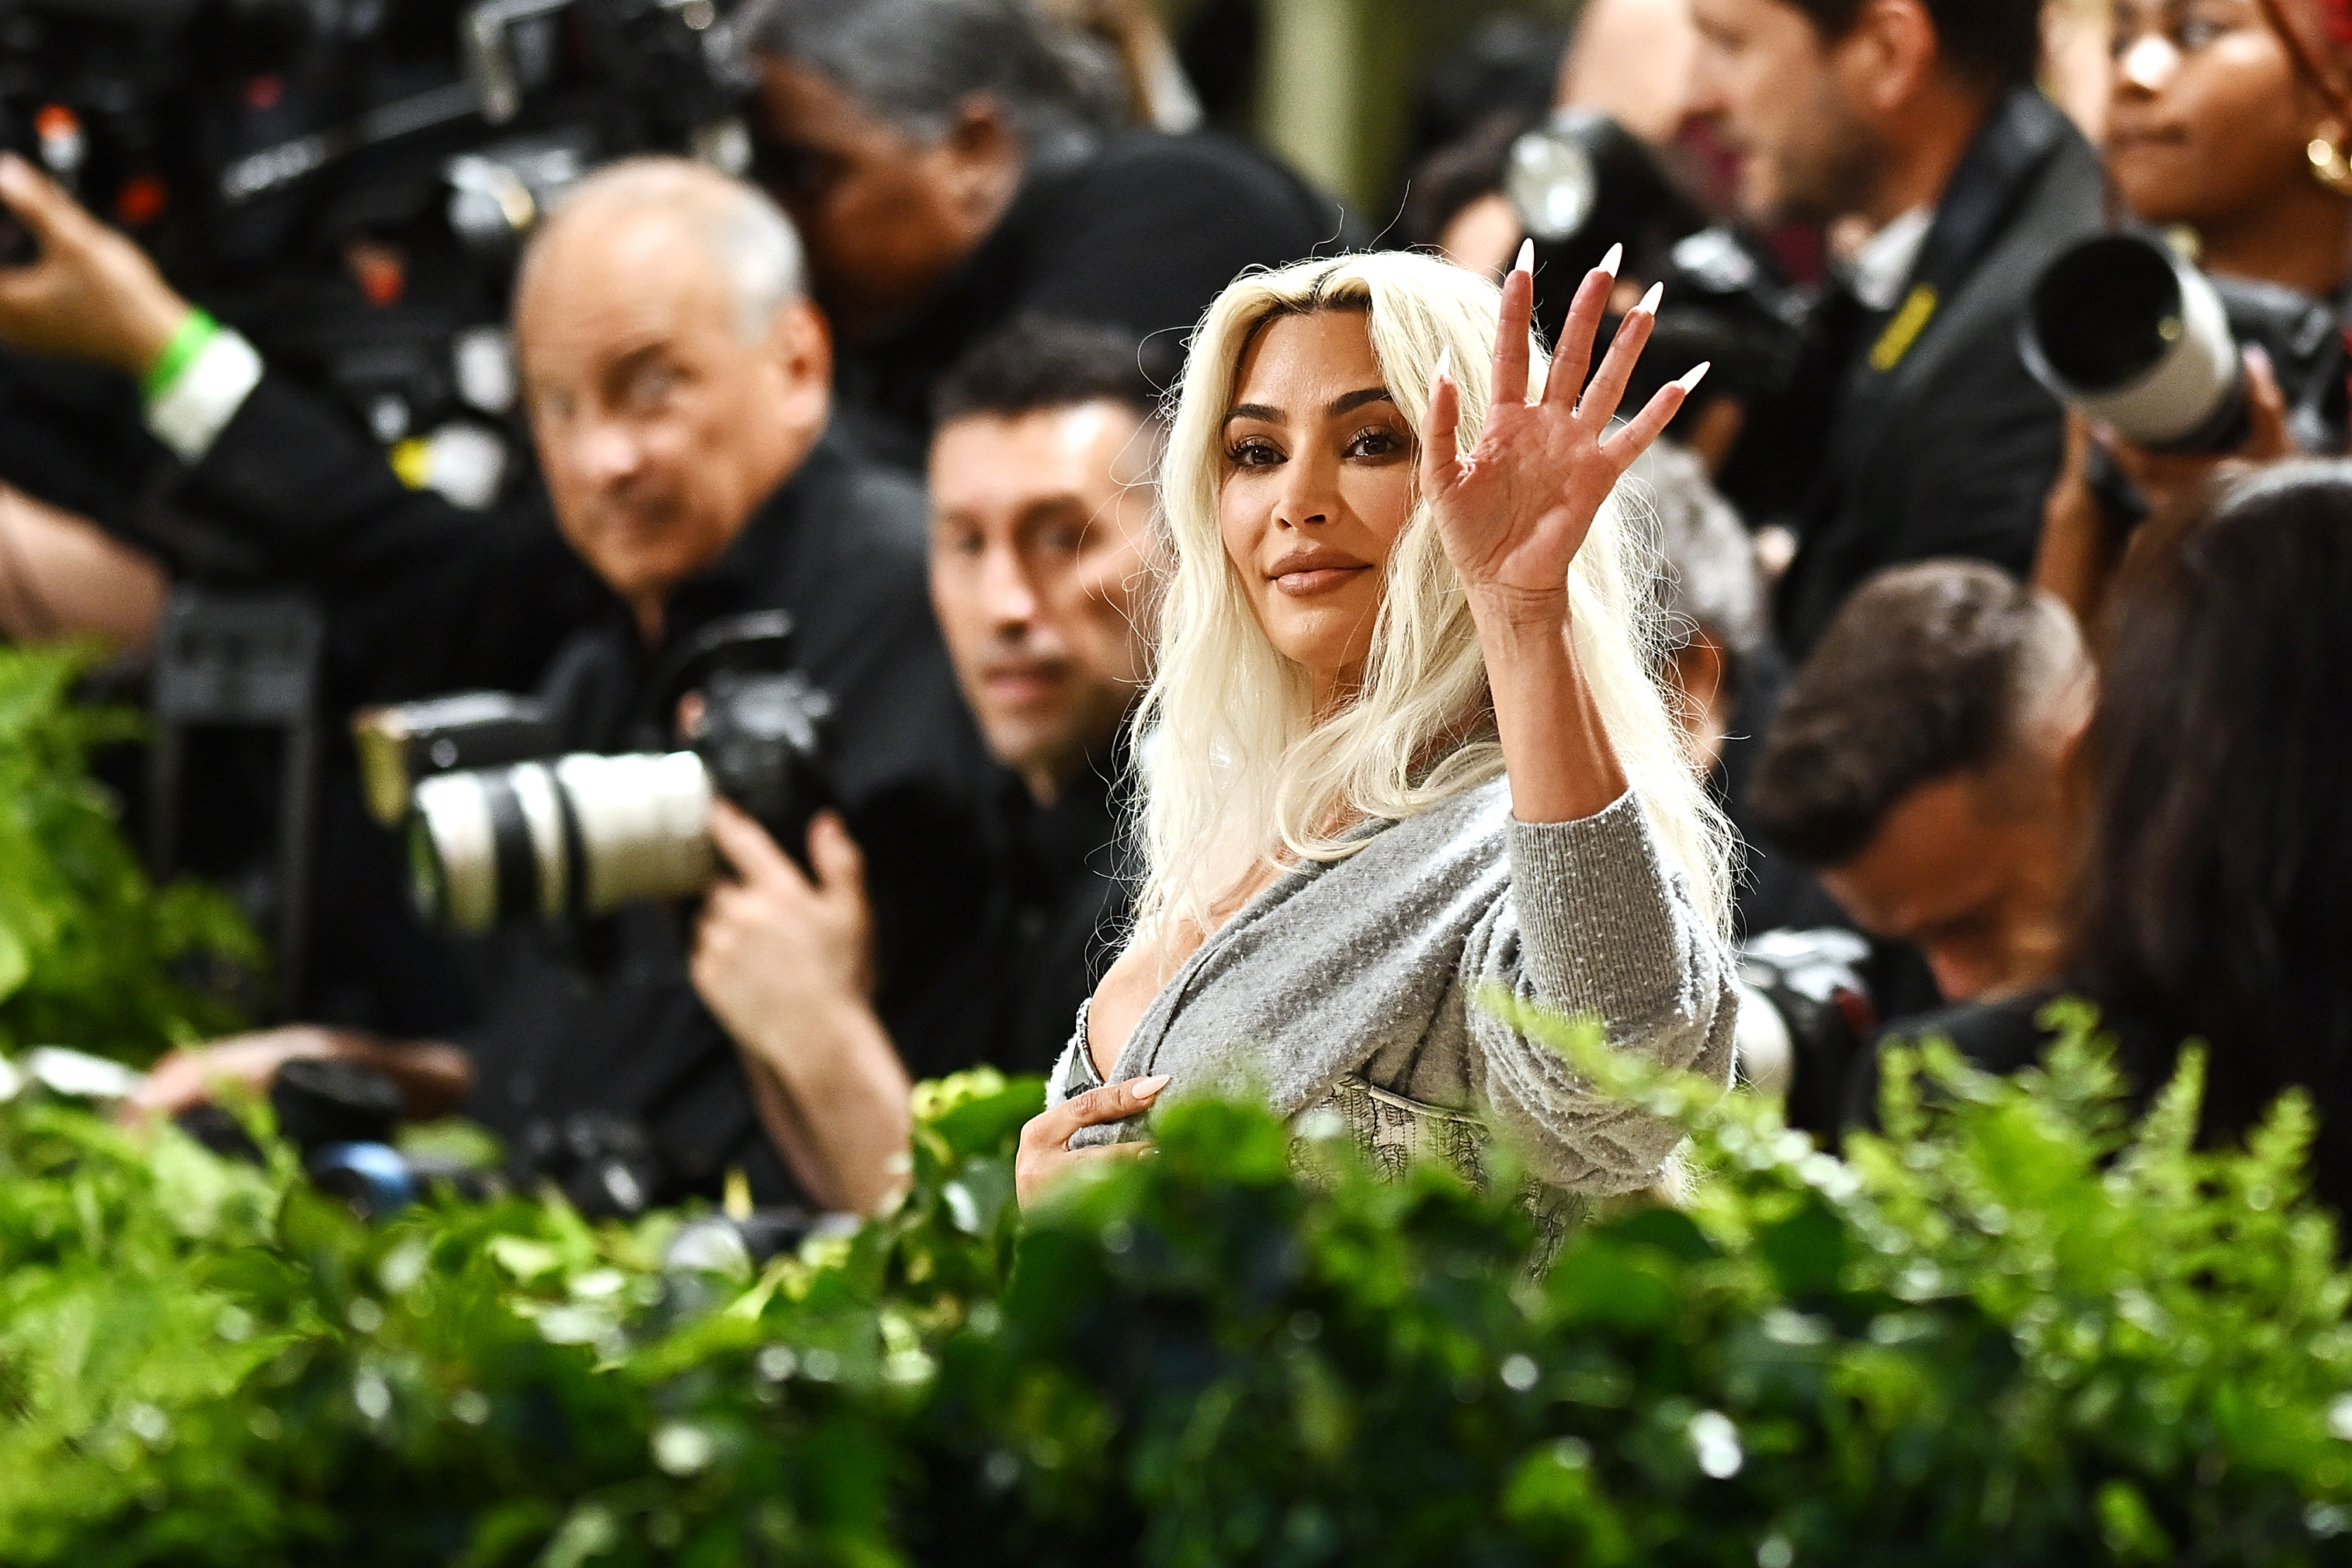 Kim Kardashian waving, surrounded by photographers at an event